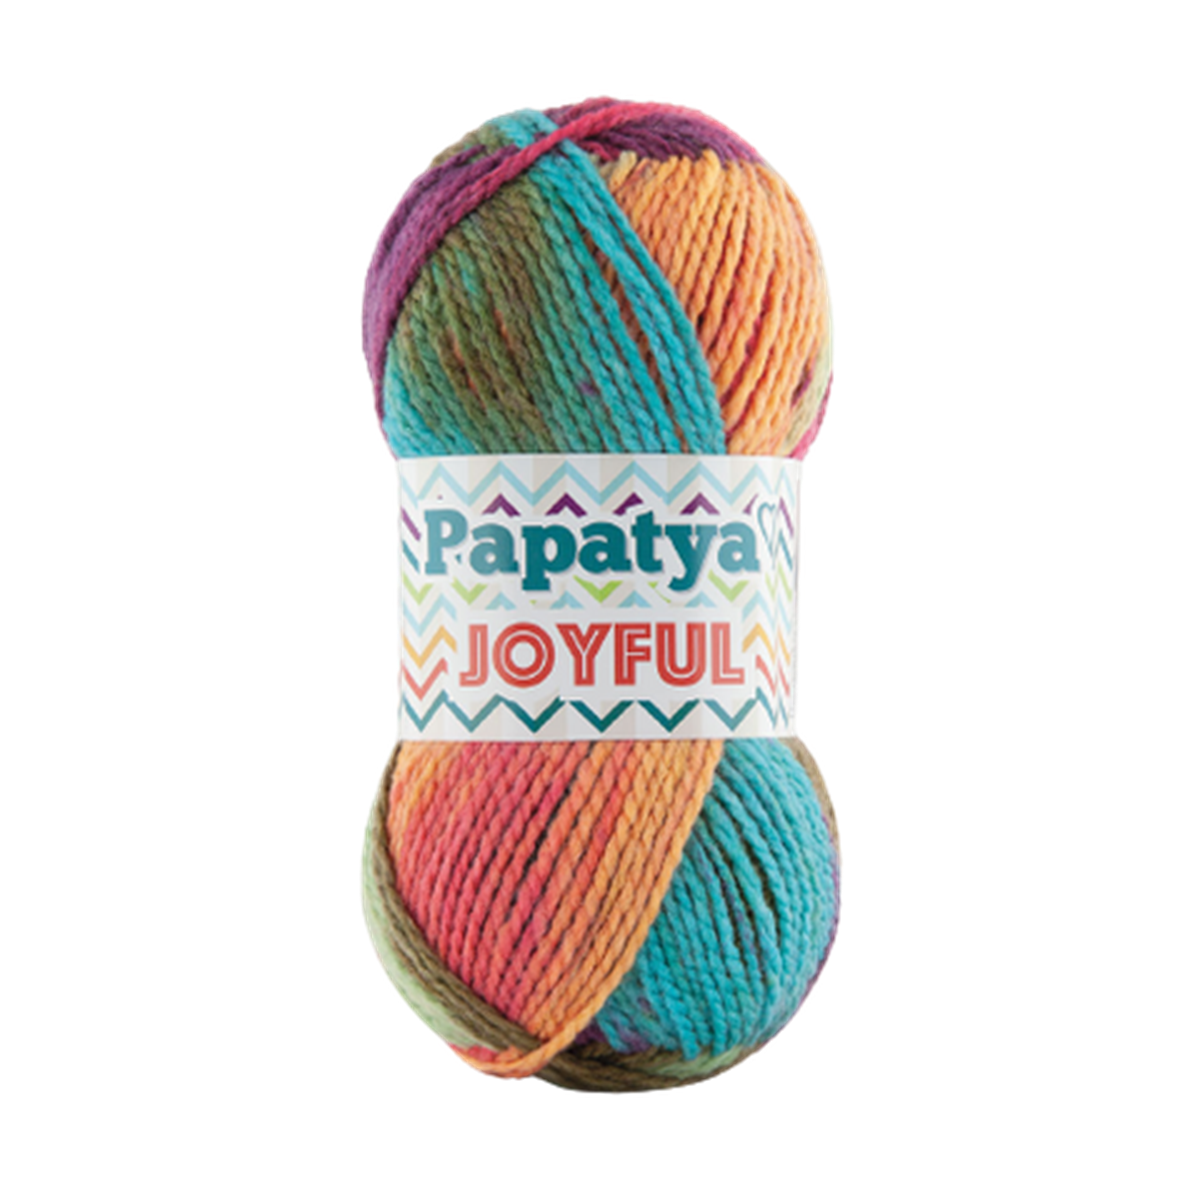 Papatya Yarns - Papatya Big Twist is now ready for your